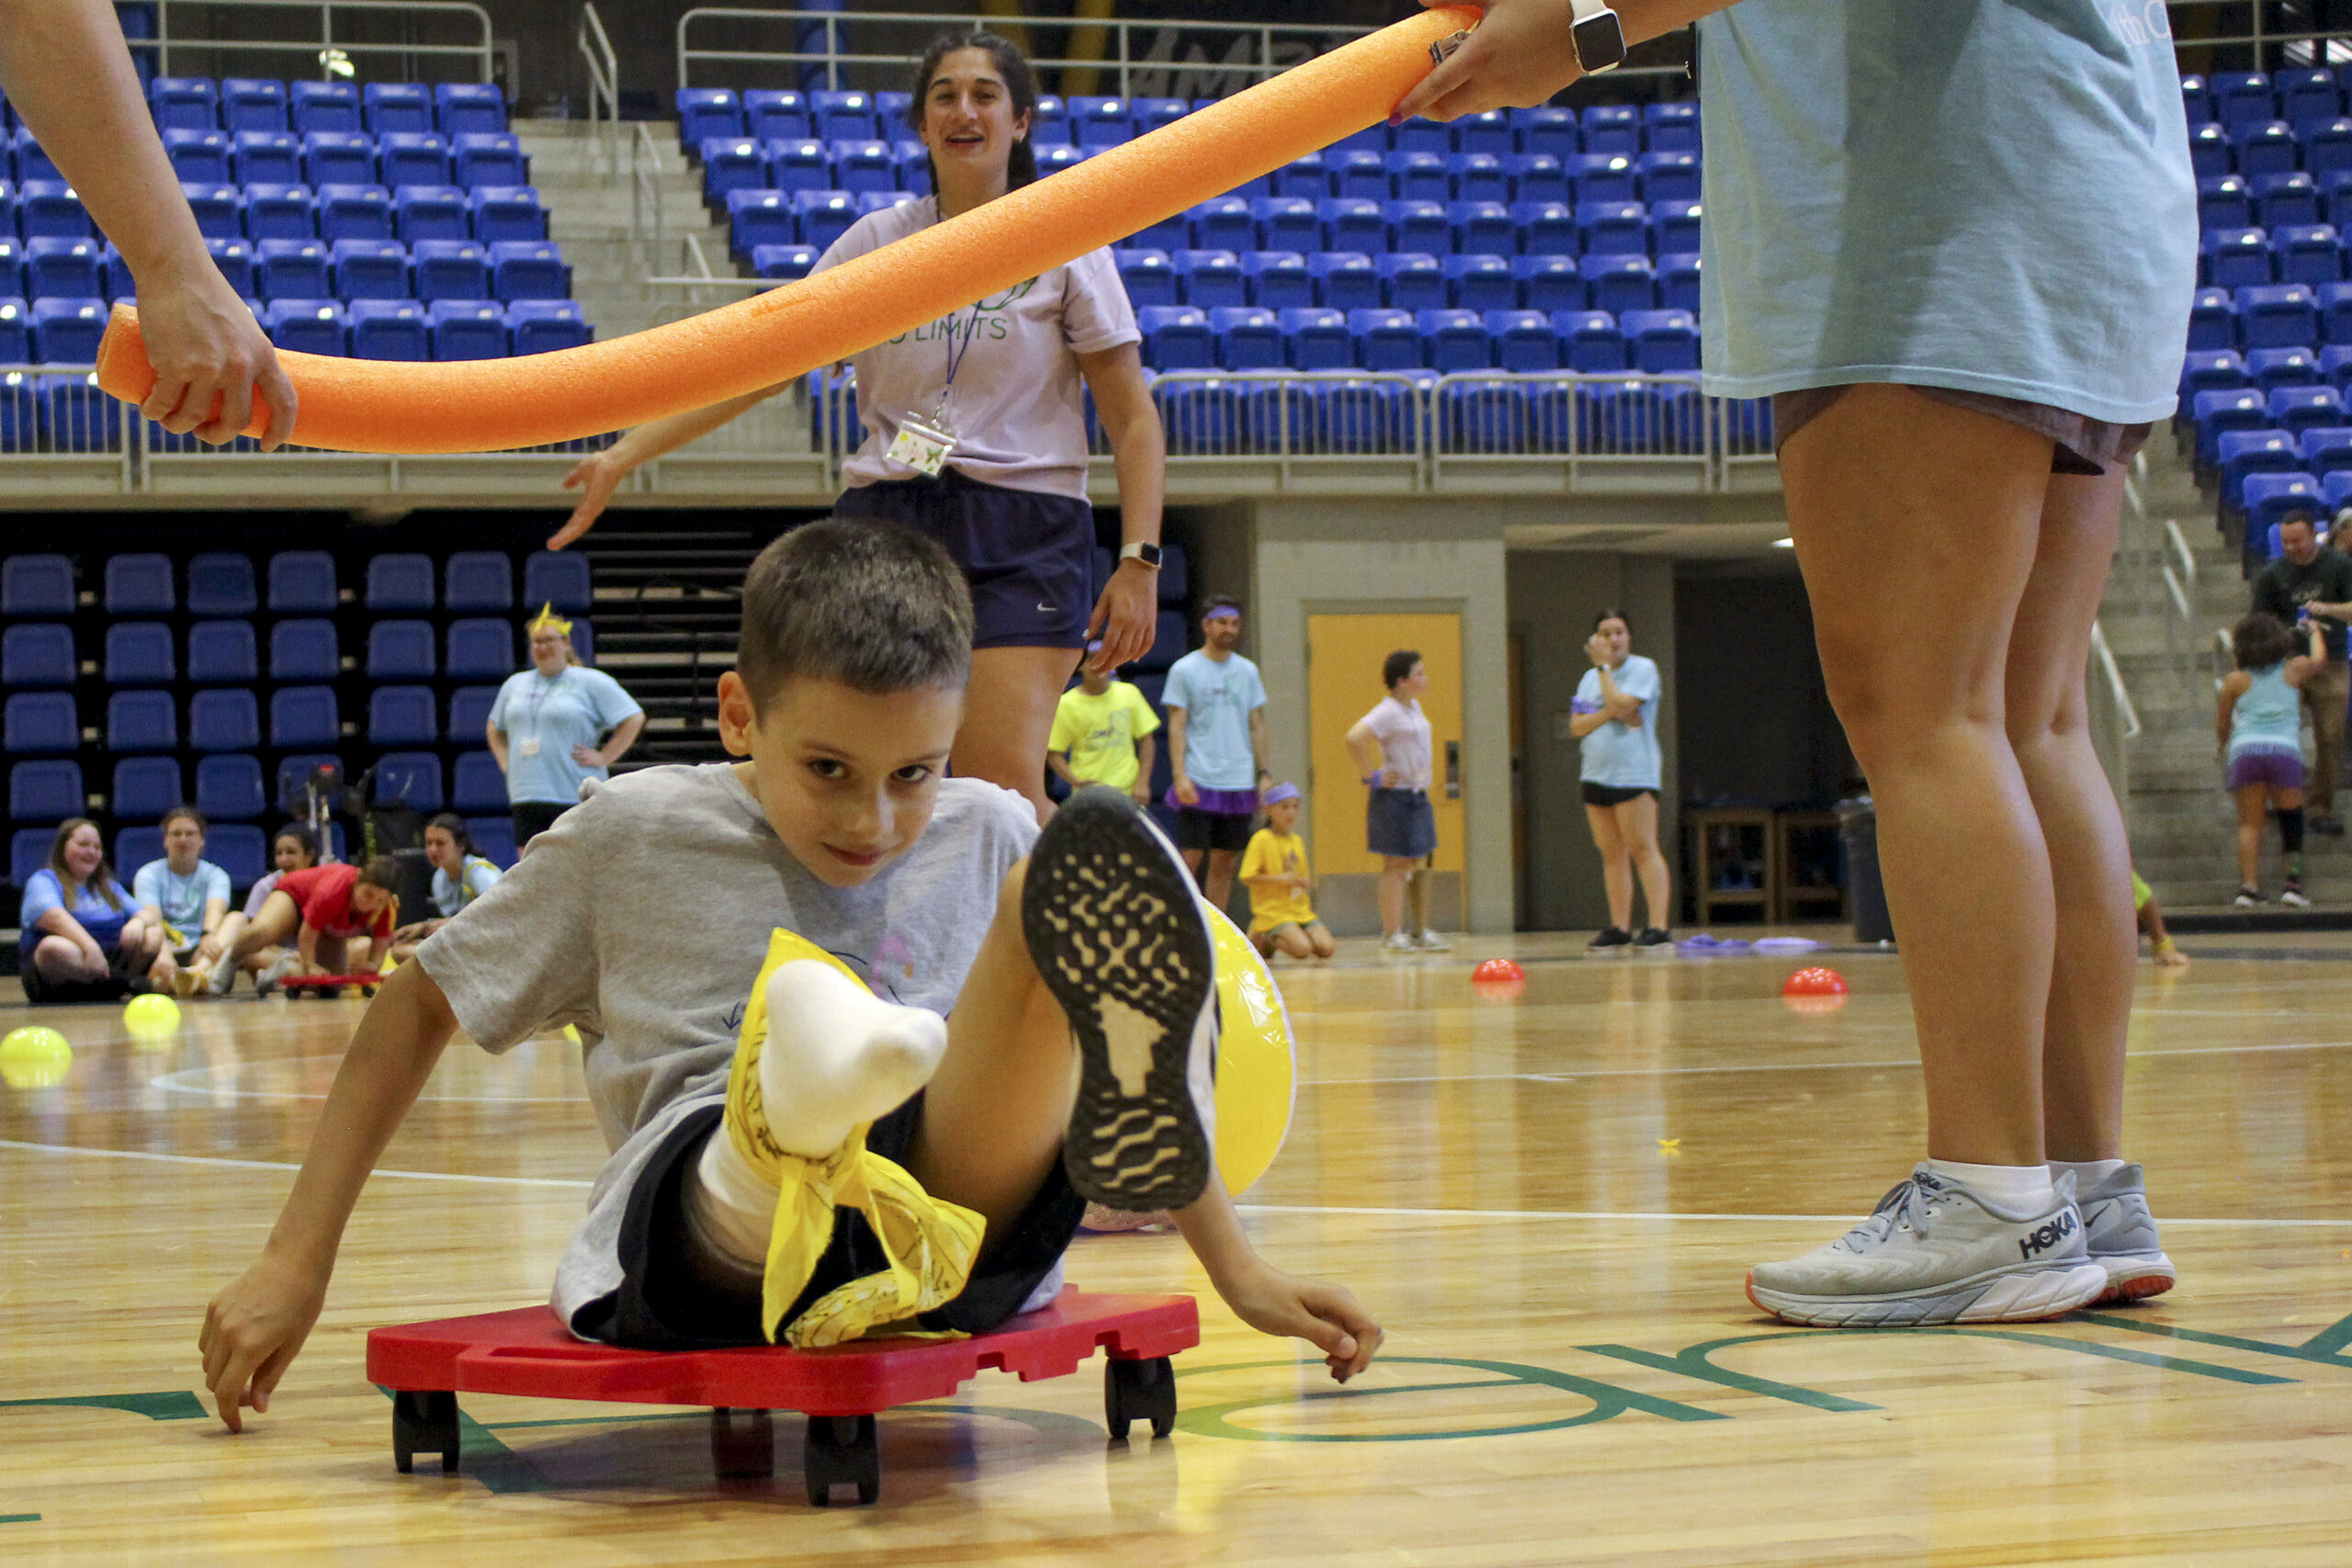 Camper Conor Dwyer participates in an obstacle course during Camp No Limits at Quinnipiac Universit...